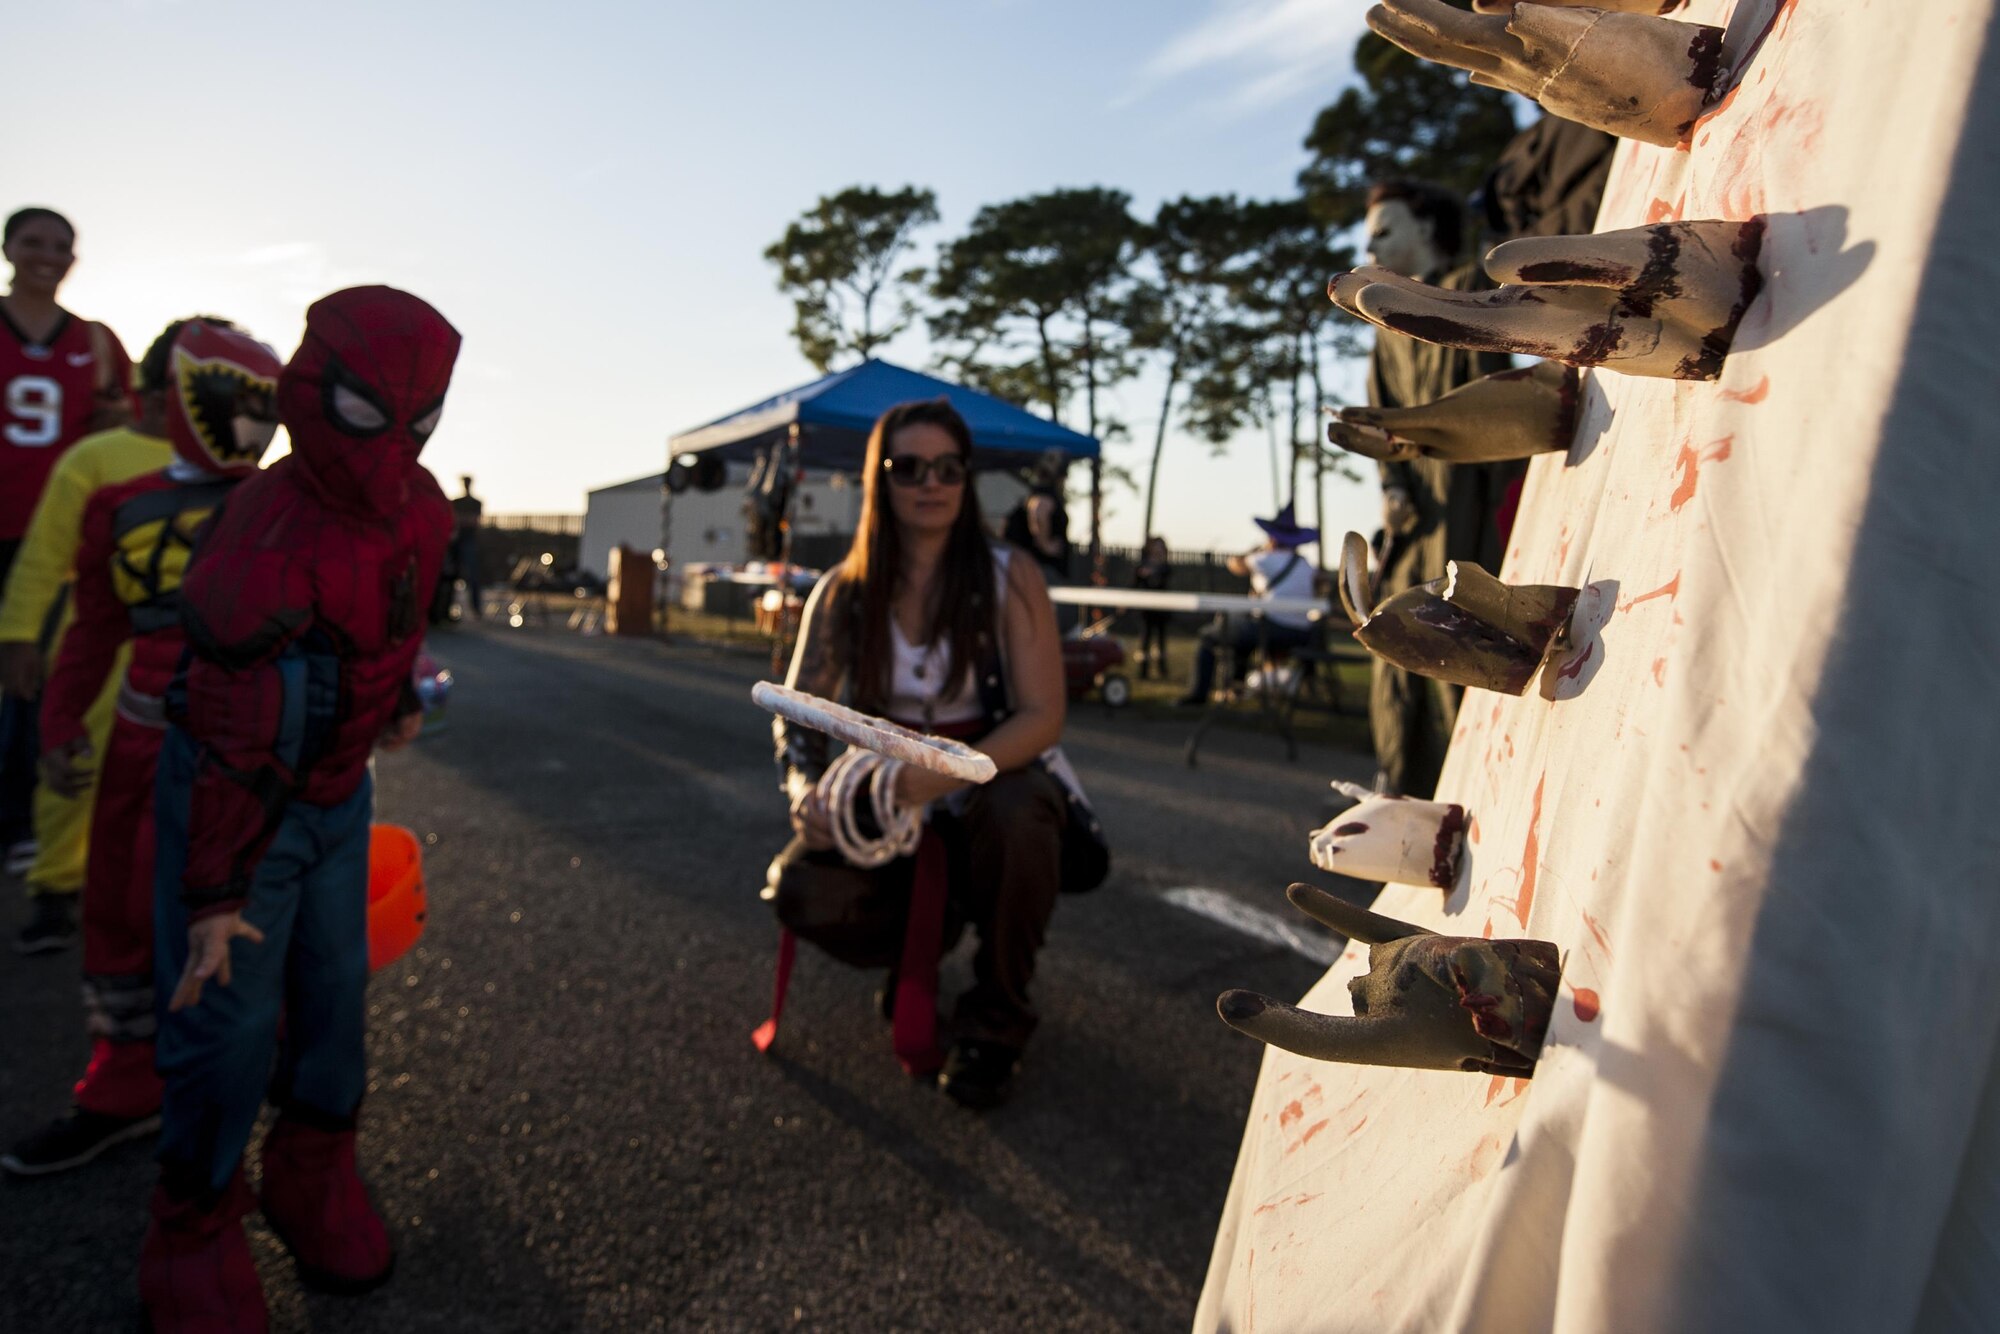 A child plays a ring toss game during the Haunted Lakes Fall Festival at Gator Lakes Golf Course on Hurlburt Field, Fla., Oct. 28, 2016. The festival was a free event hosted by the 1st Special Operations Force Support Squadron with complimentary food and fun for kids of all ages that included haunted hay rides, costume contests, games and a movie. (U.S. Air Force photo by Airman 1st Class Joseph Pick)